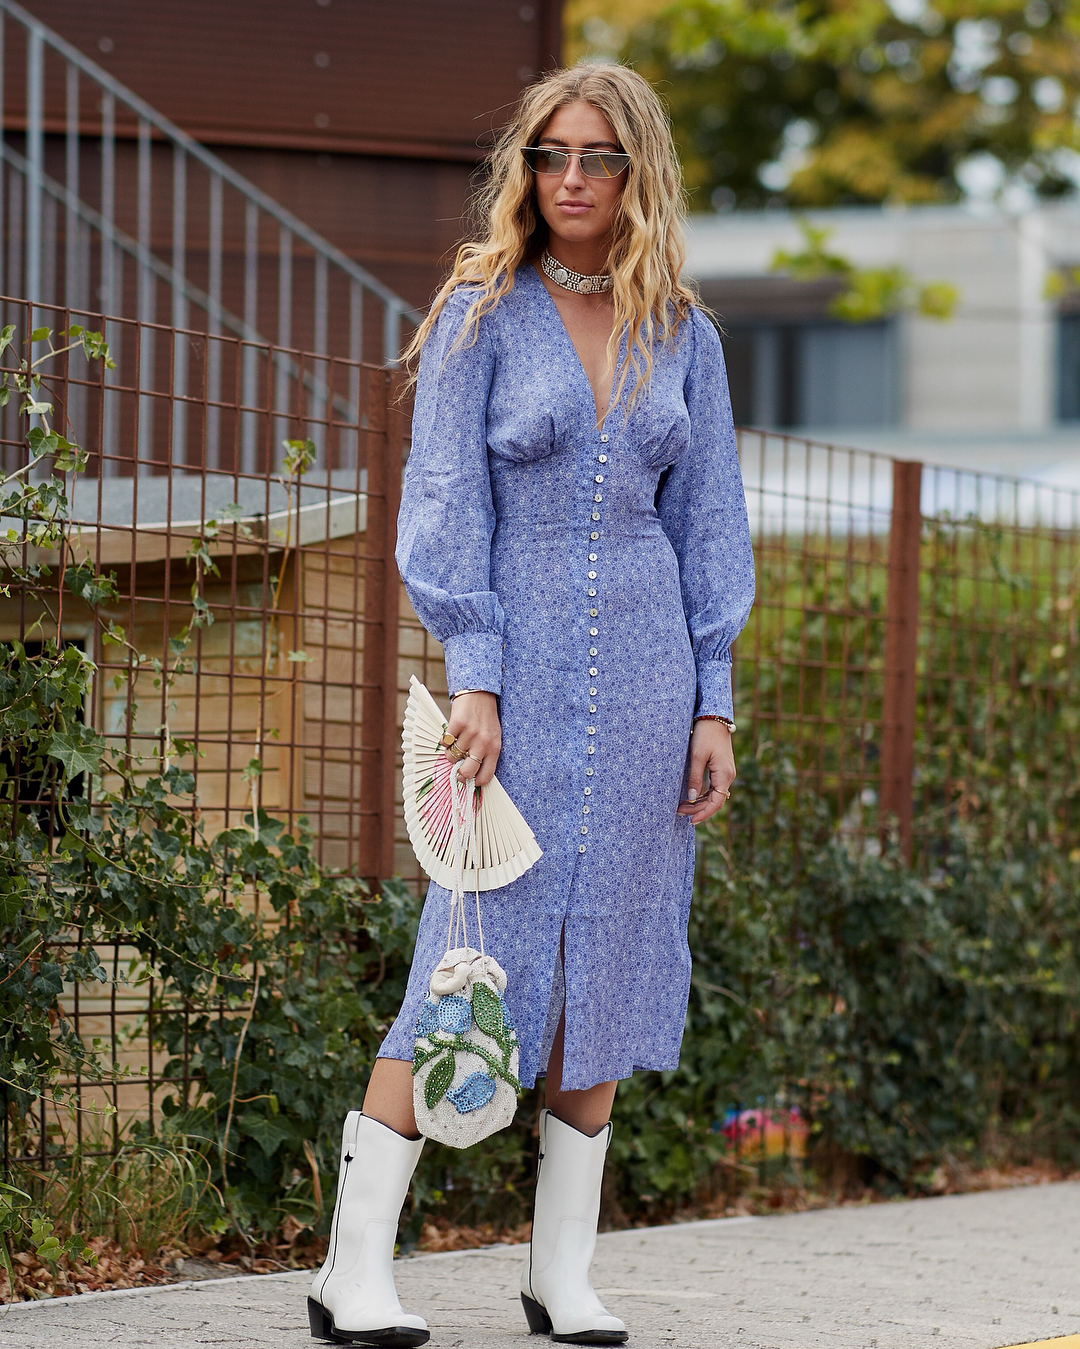 Best fall street style outfits: cowboy boots